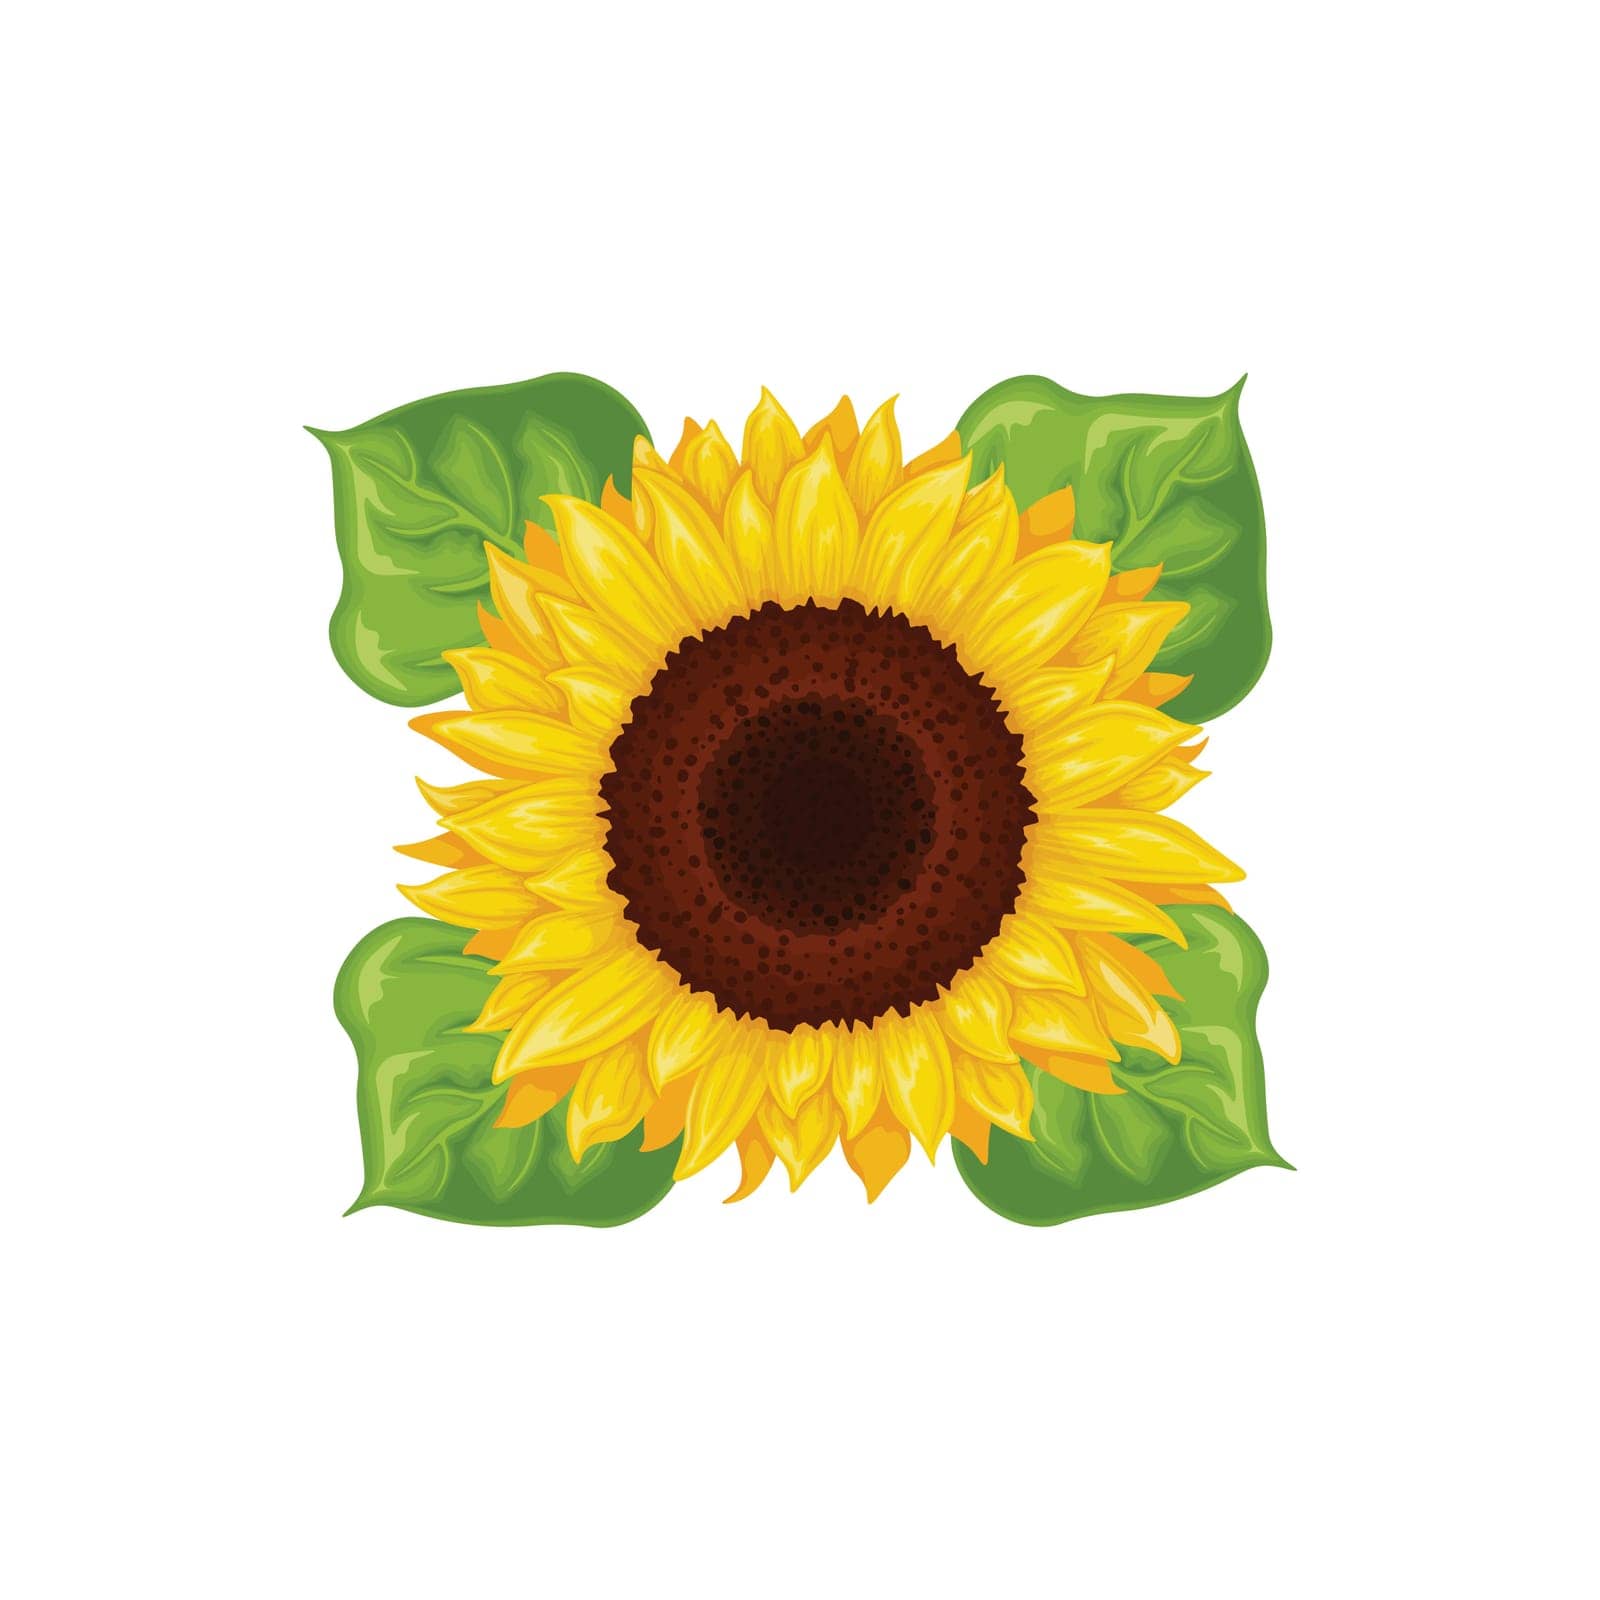 Sunflower. The image of a sunflower in cartoon style. Yellow sunflower with green leaves. Vector illustration isolated on a white background.